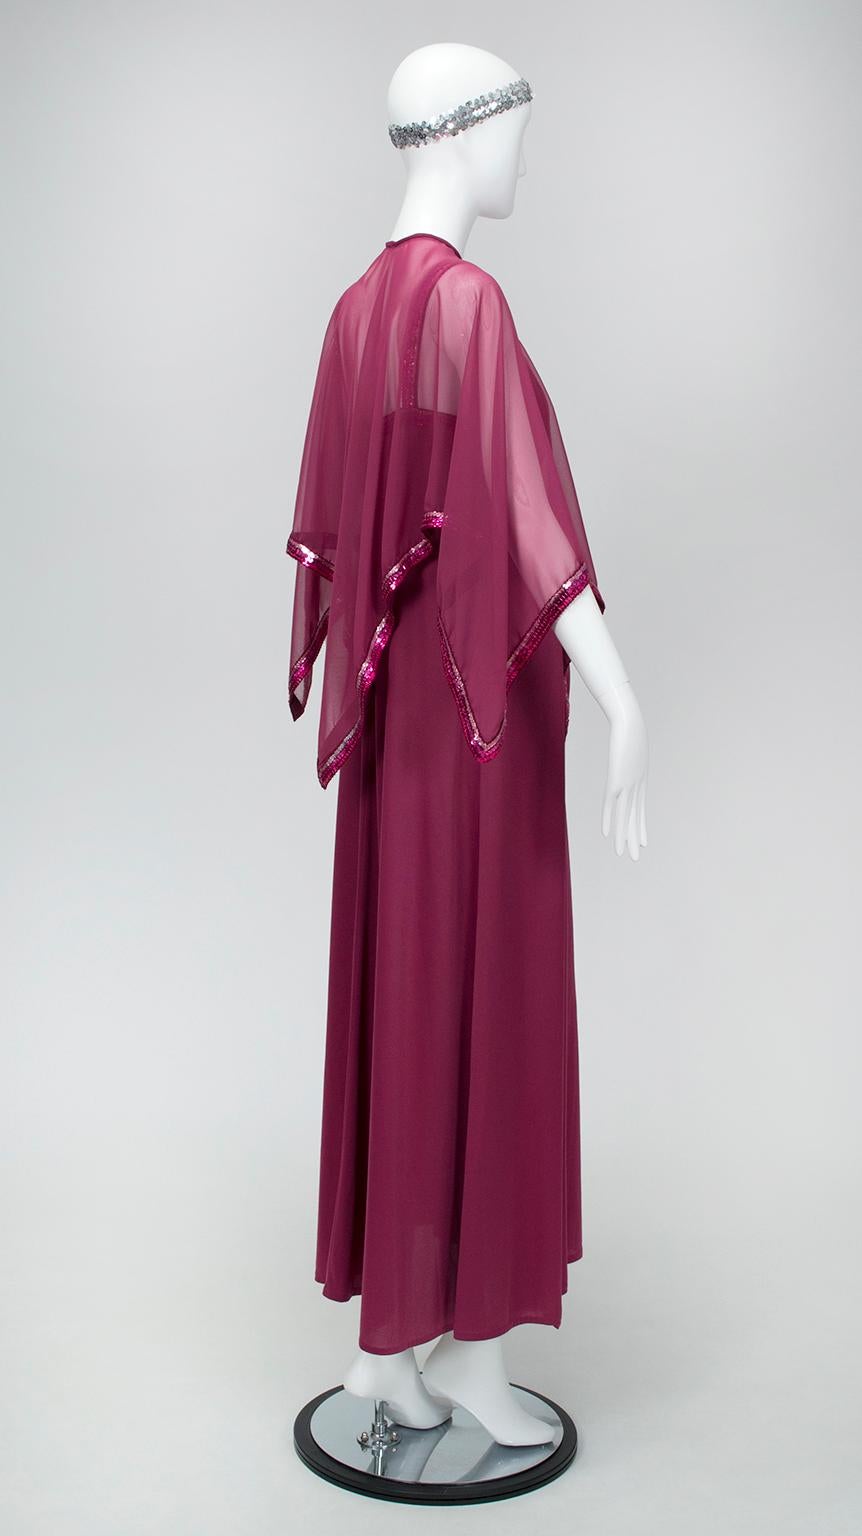 When your Bianca Jagger fix needs attention, turn to this jewel tone maxi dress à la 1970s Halston. The sleek and sinewy gown is balanced by the billowing butterfly capelet, whose edges are trimmed in sequins that catch light like a disco ball. A